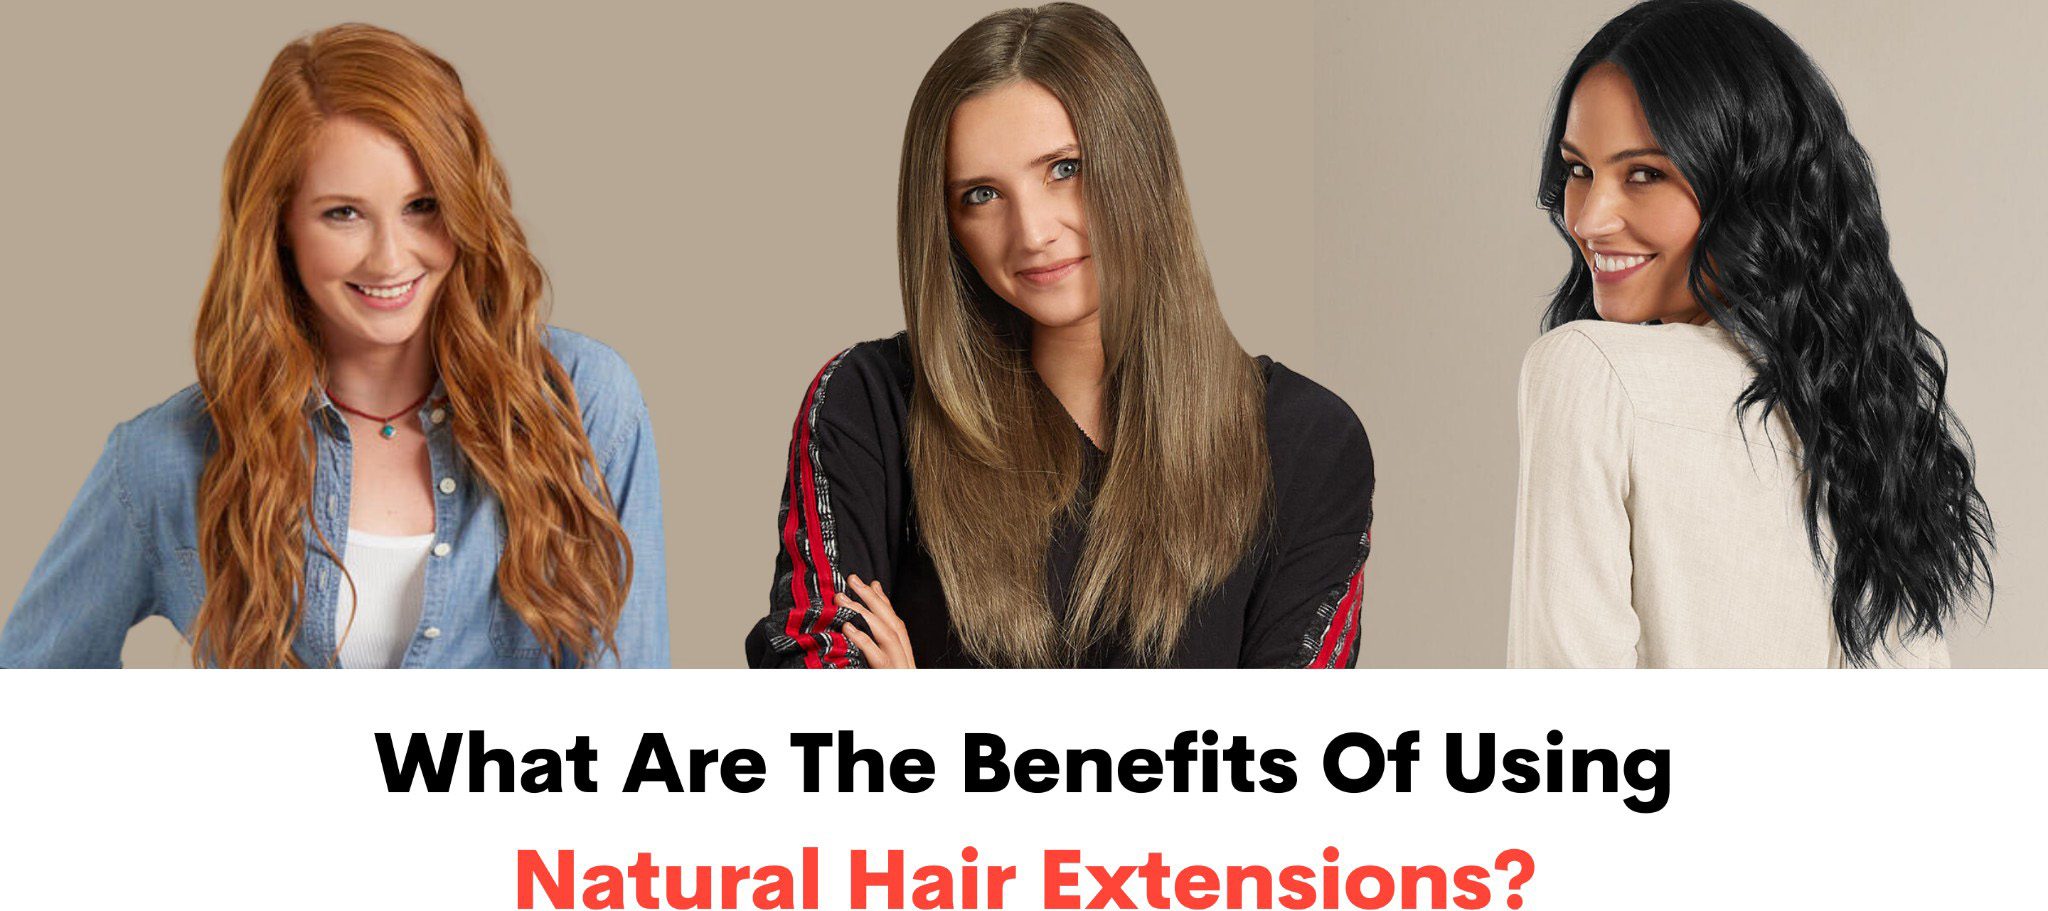 what are the benefits of using natural hair extensions